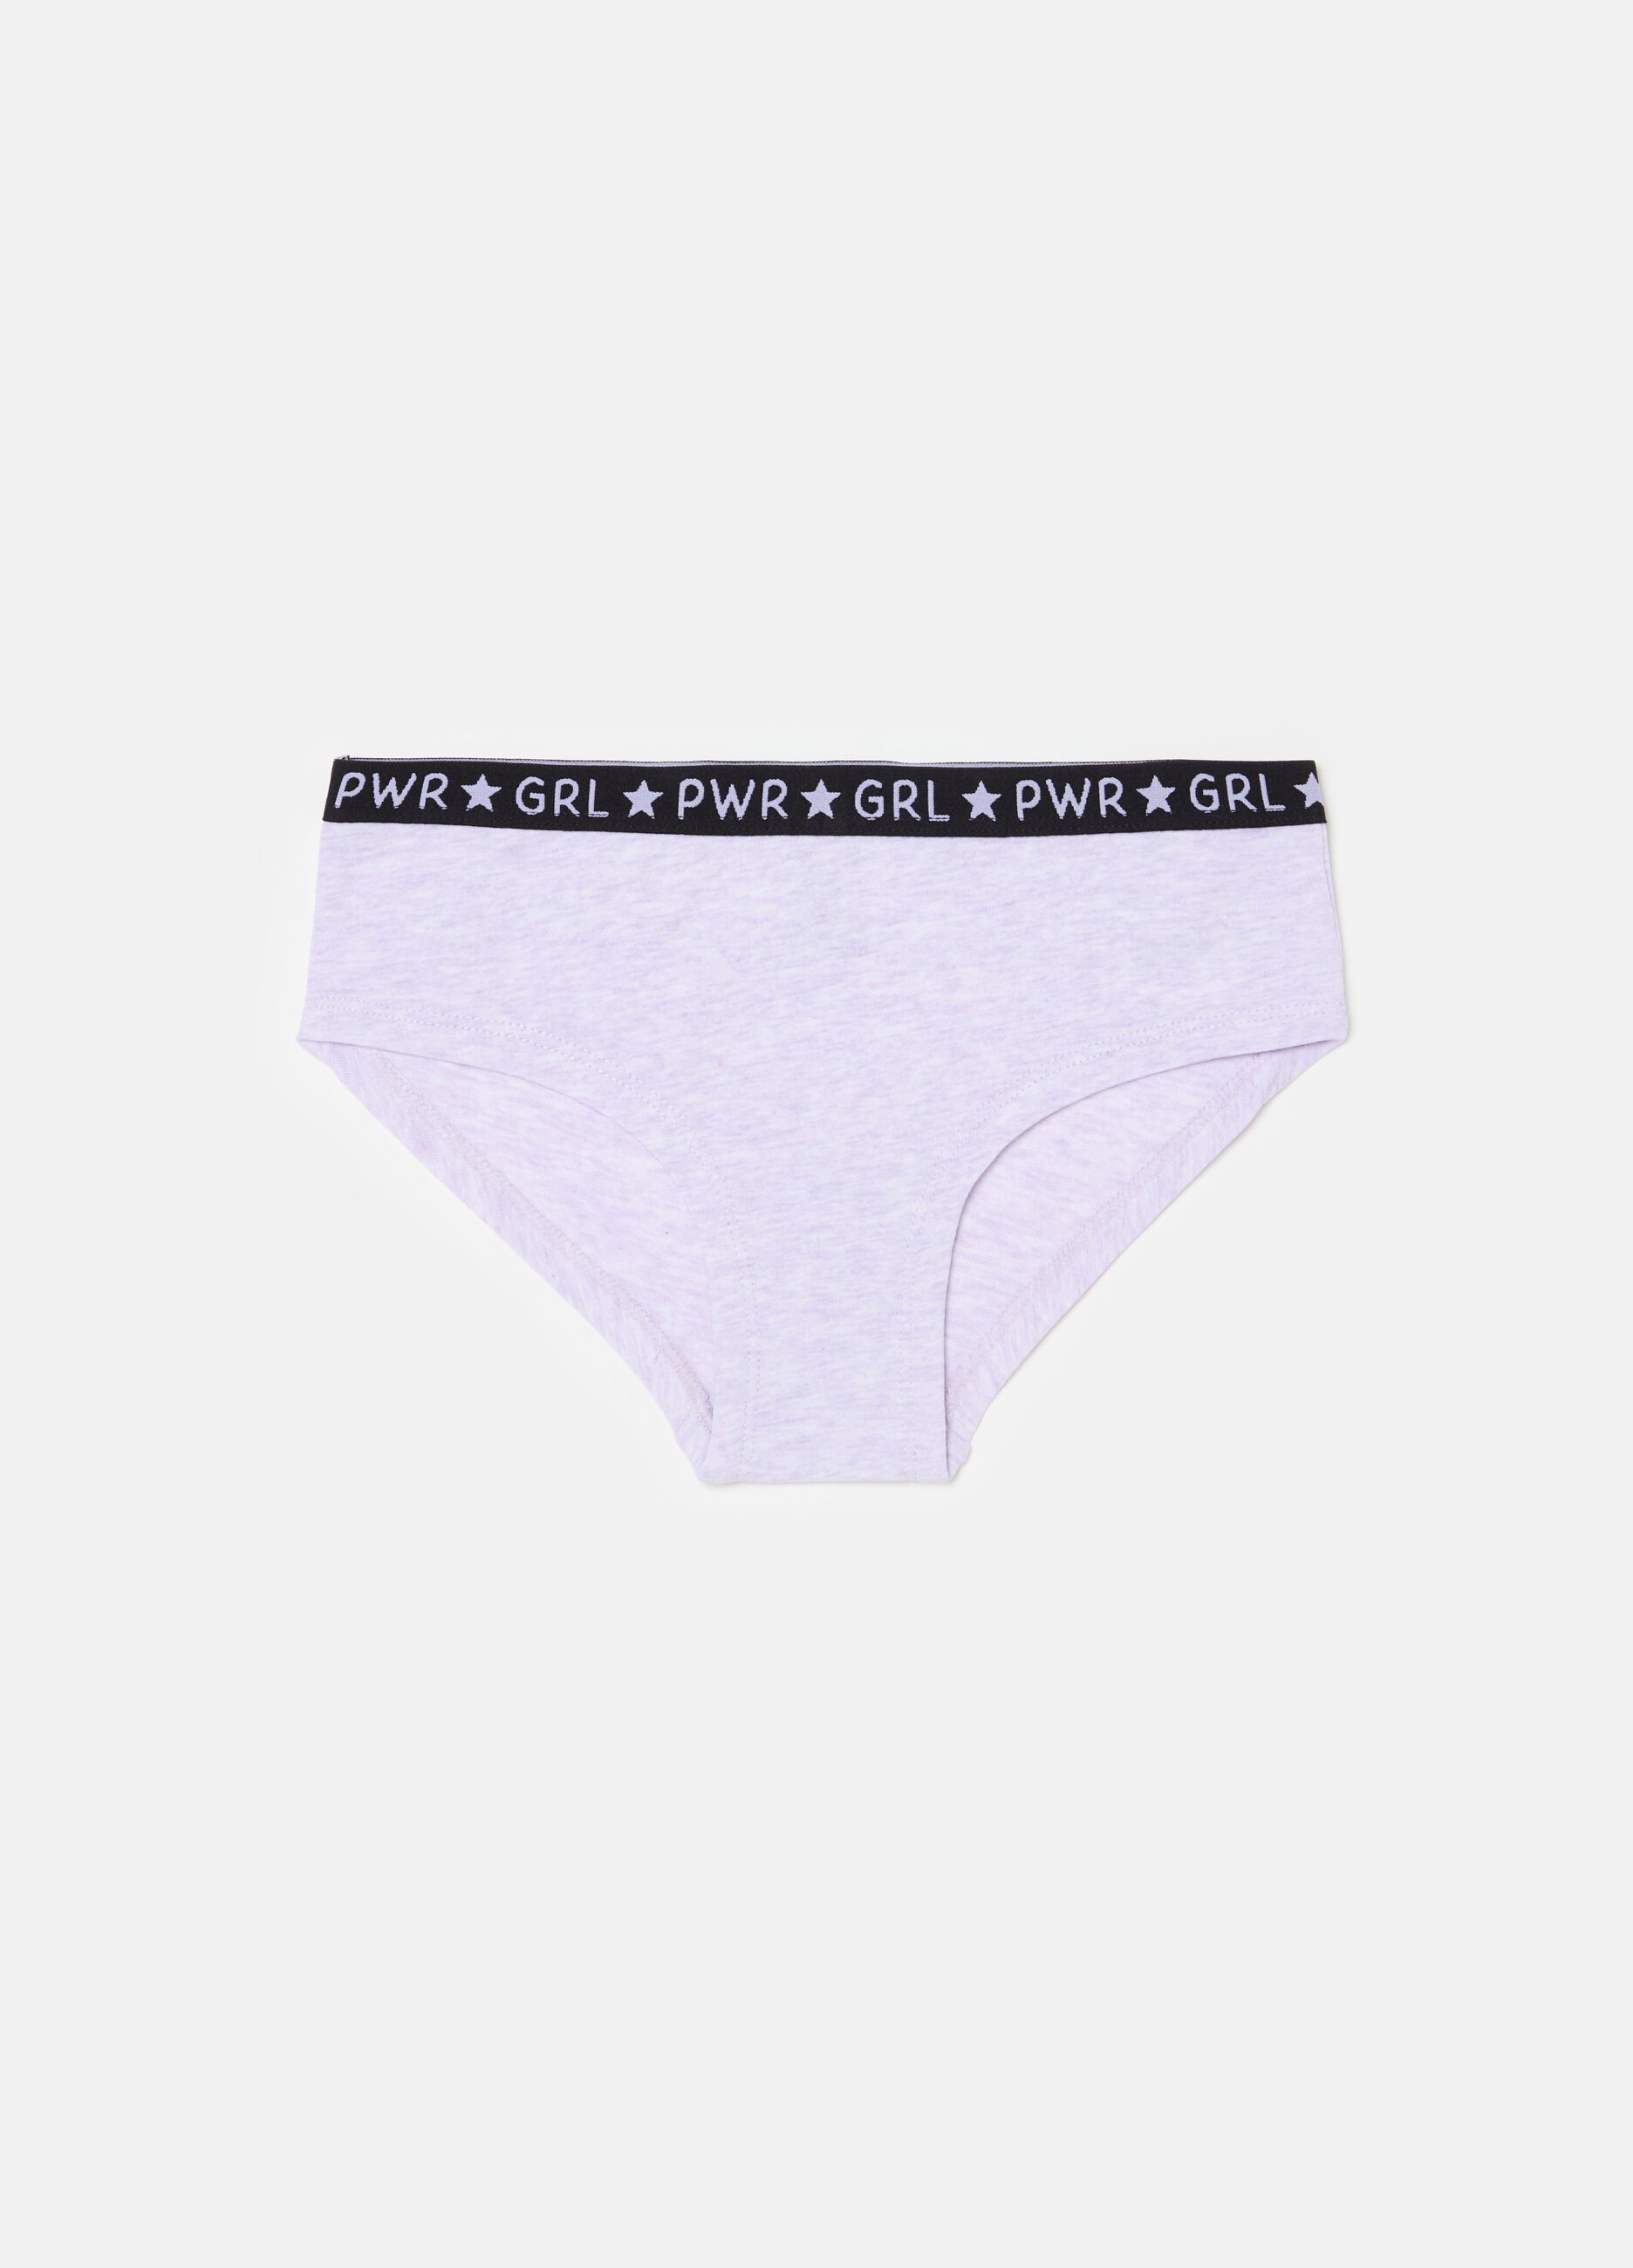 Organic cotton French knickers with print